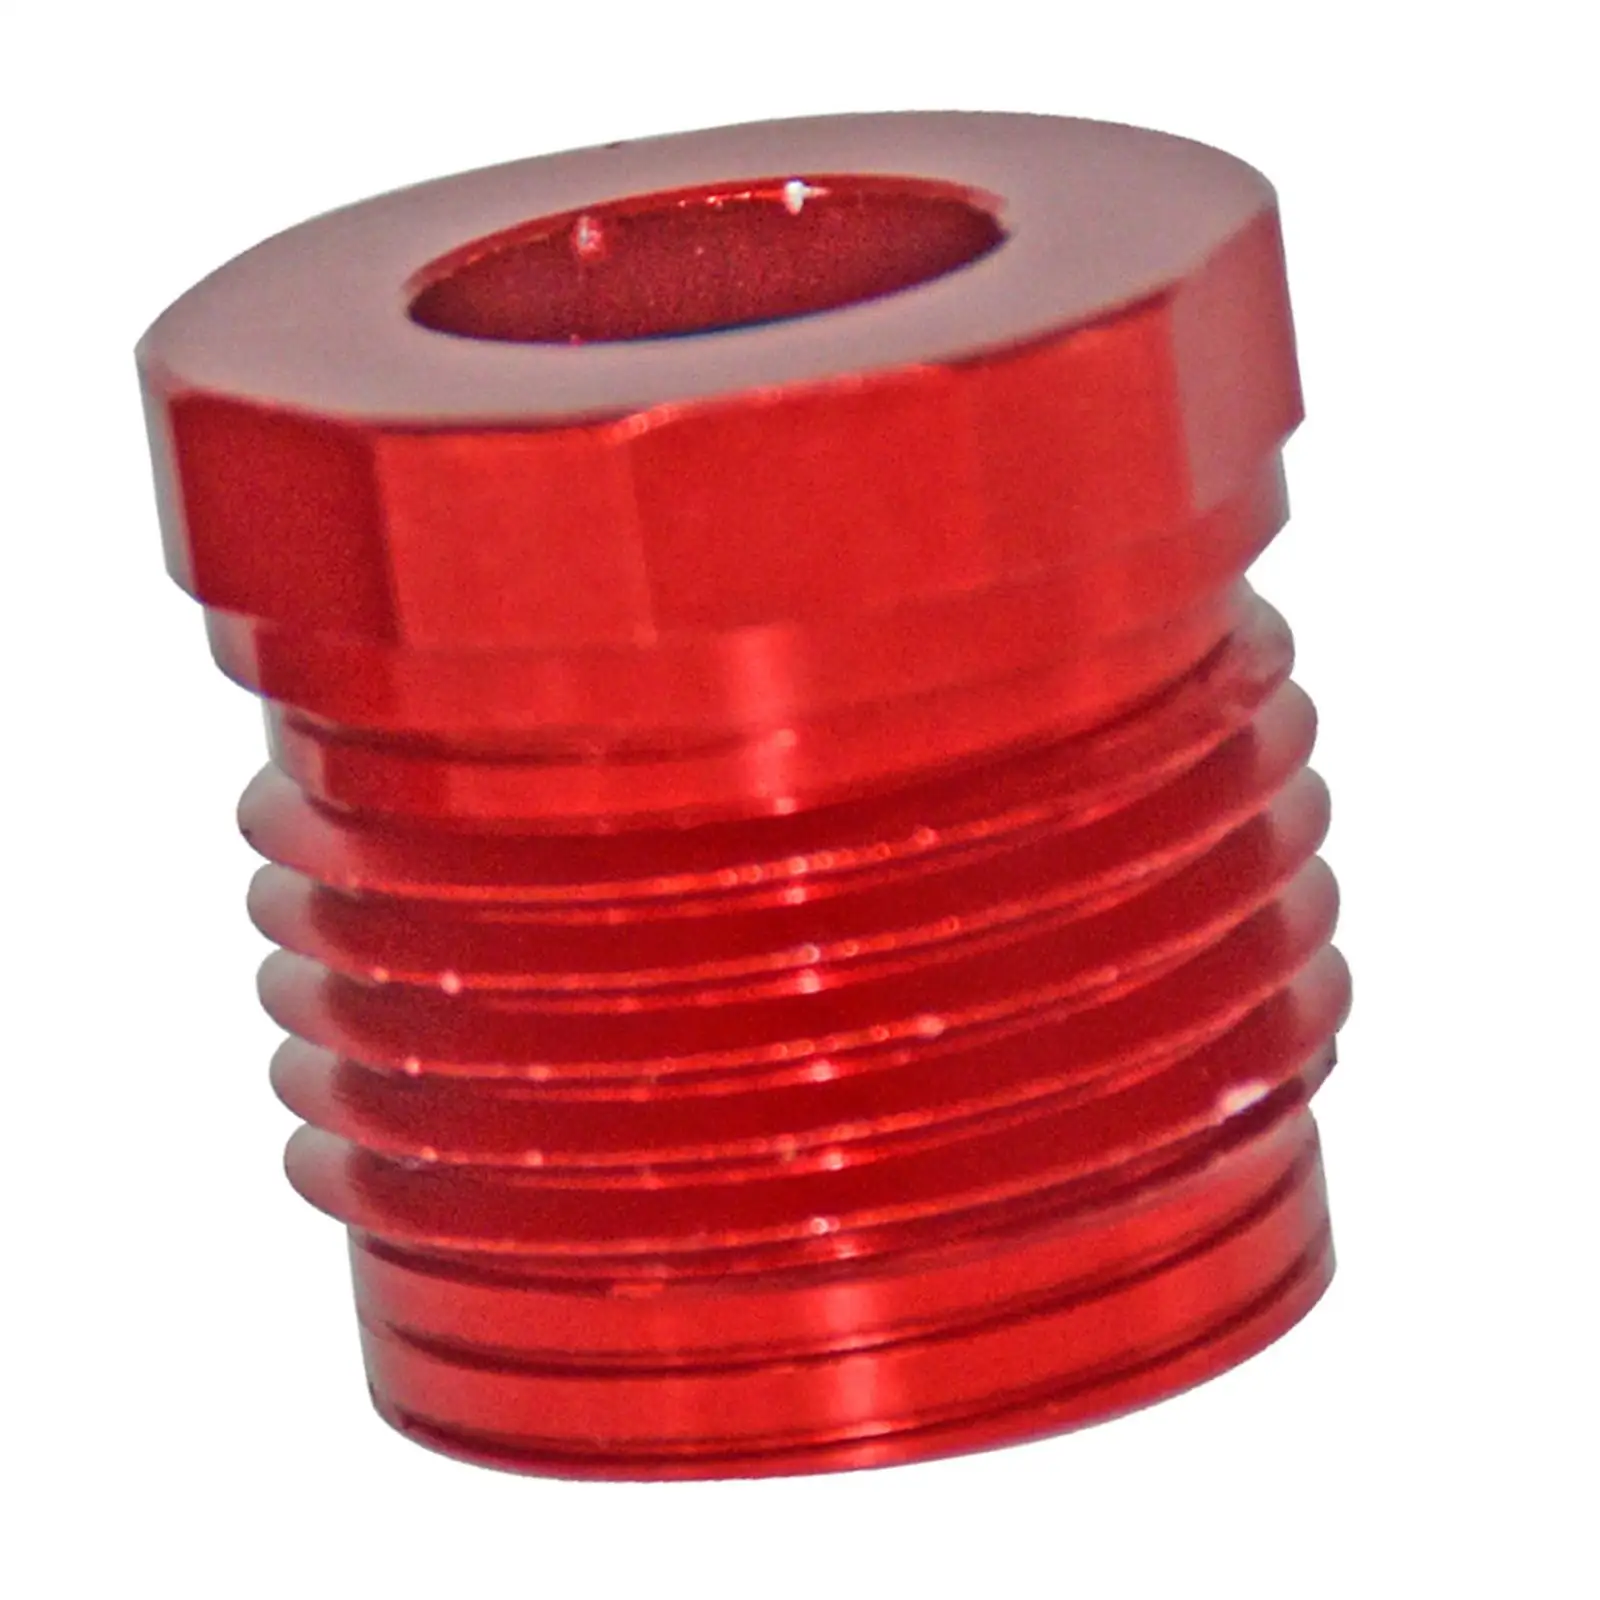 Steering and Reverse Cable Lock Nut Sturdy Replacement Aluminum Red Cable Lock